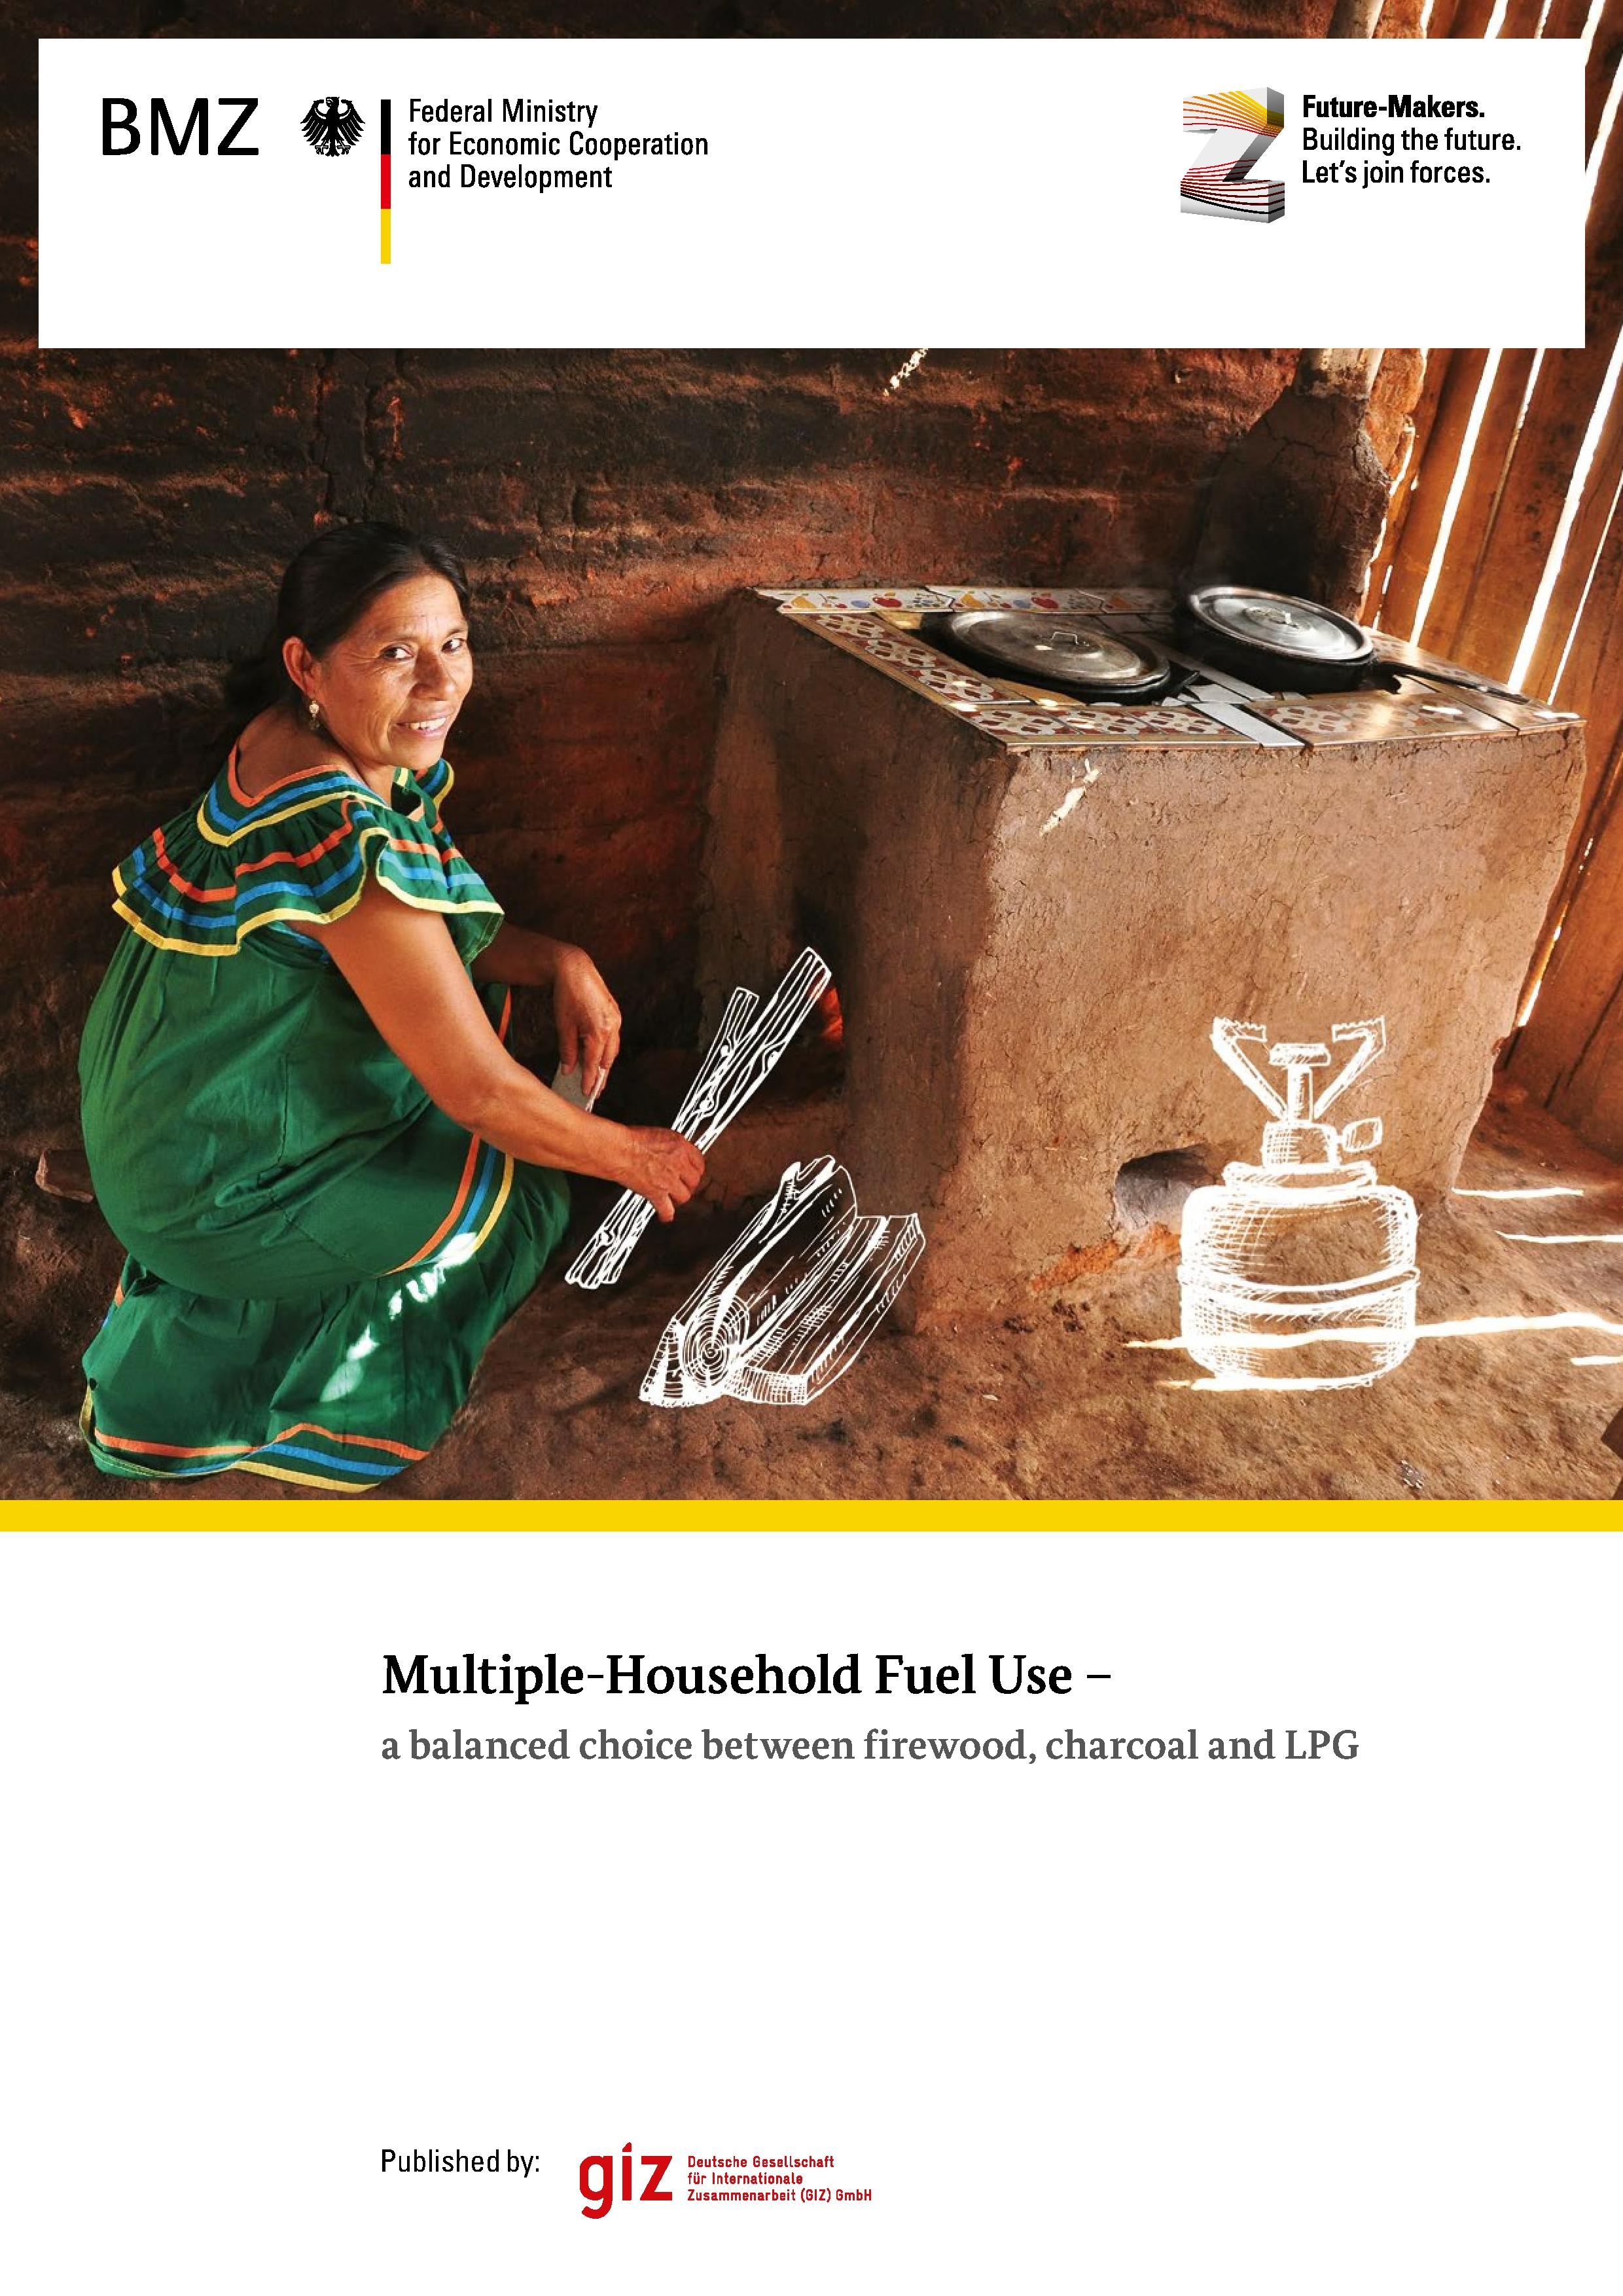 Multiple-Household Fuel Use – a balanced choice between firewood, charcoal and LPG